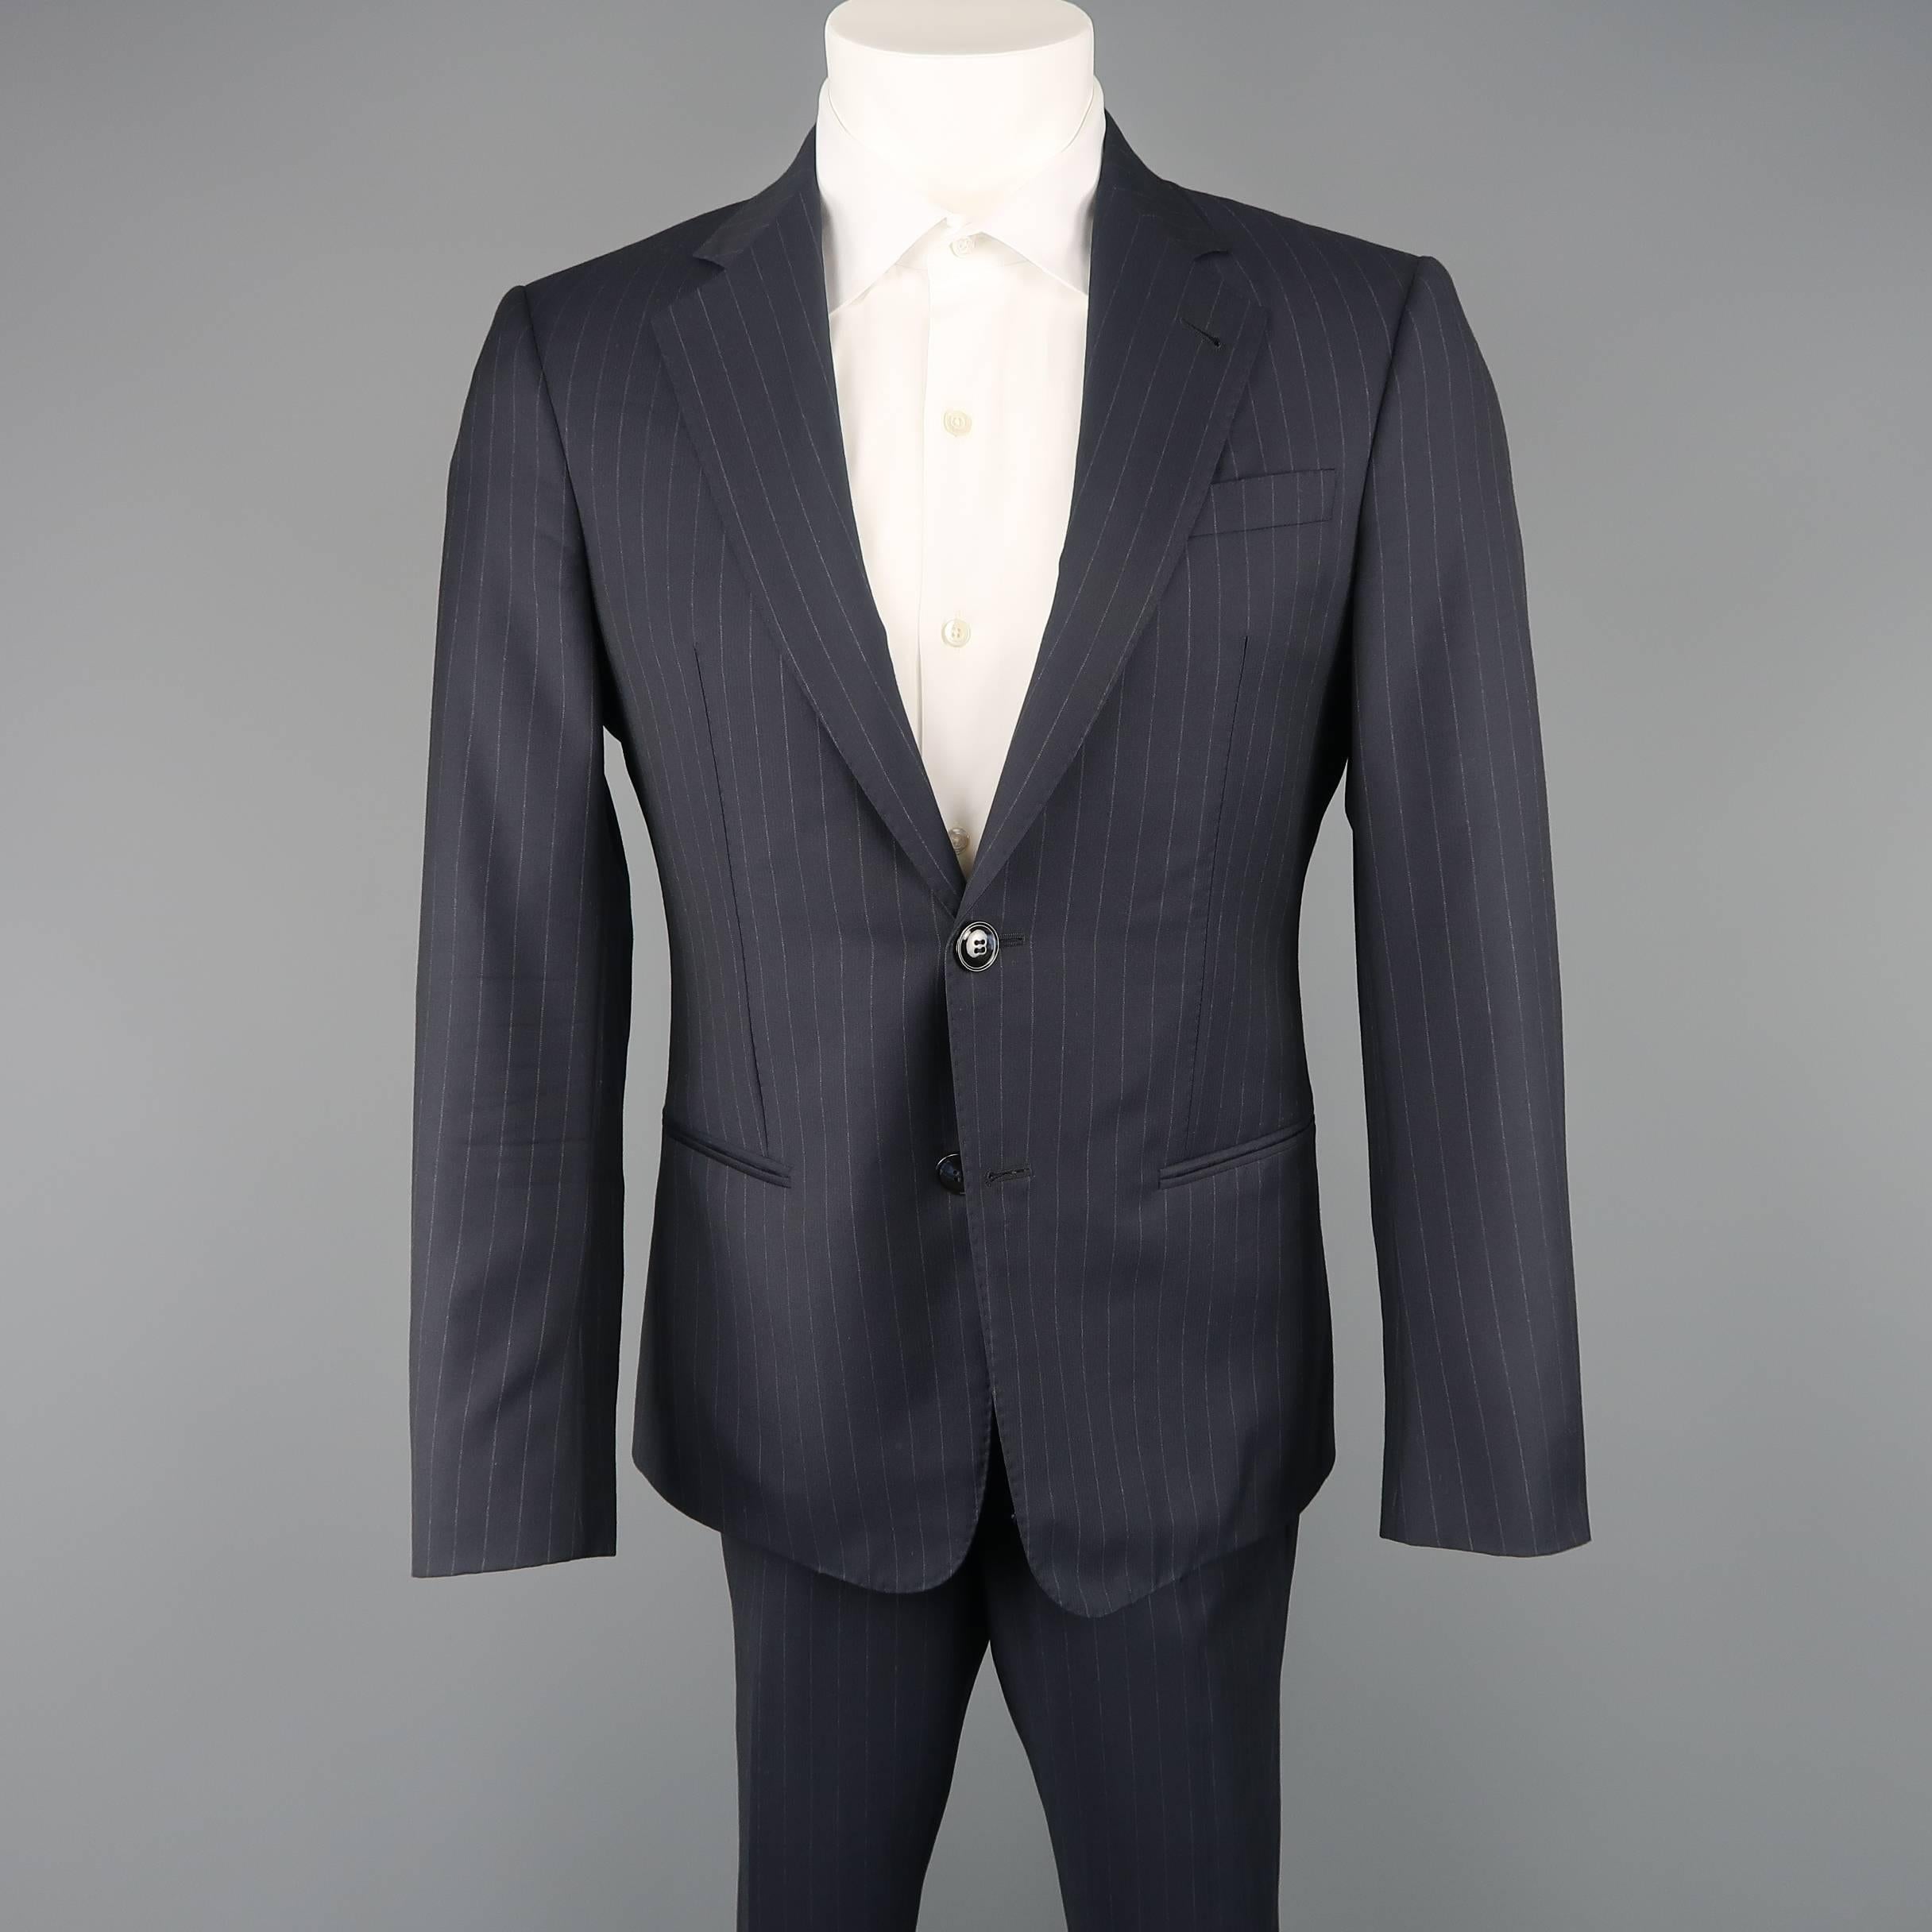 Classic GIORGIO ARMANI two piece suit comes in navy chalk stripe wool and includes a two button, single breasted sport coat with notch lapel and matching flat front trousers. Made in Italy.
 
Good Pre-Owned Condition.
Marked: IT 46
 
Measurements:
